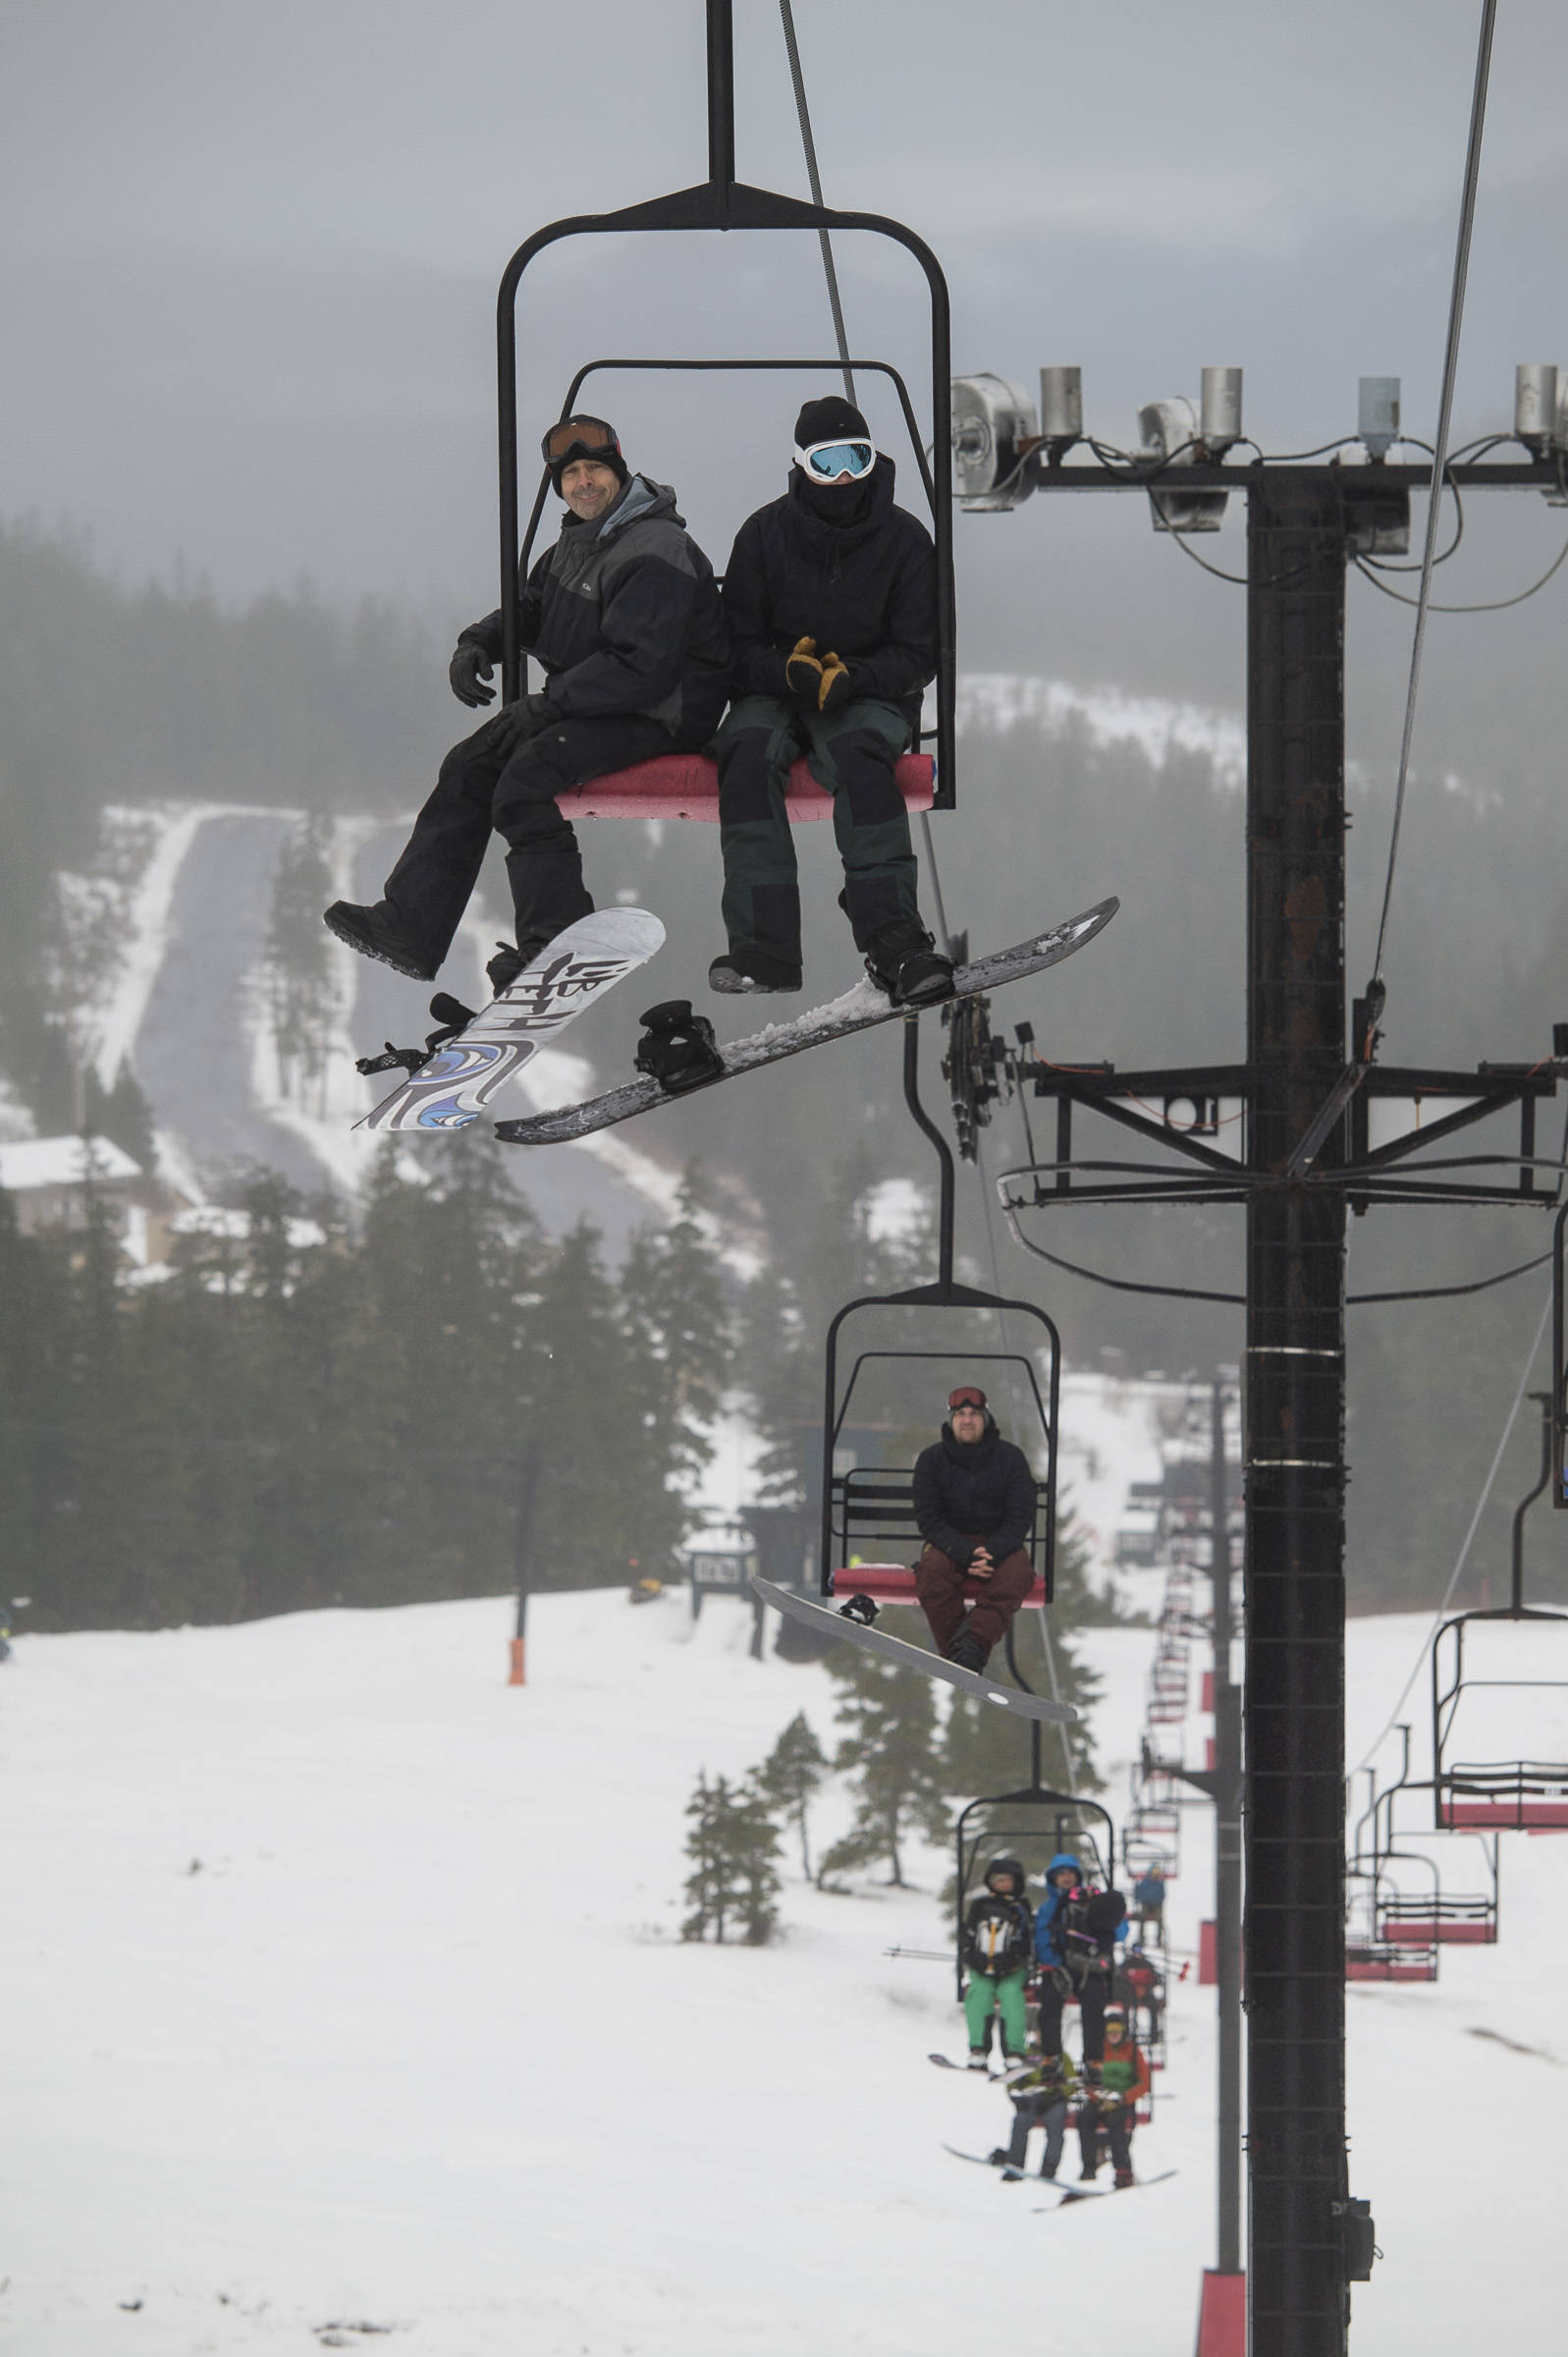 Early birds ride the Hooter Chairlift at Eaglecrest on Monday, Dec. 17, 2018. (Michael Penn | Juneau Empire)